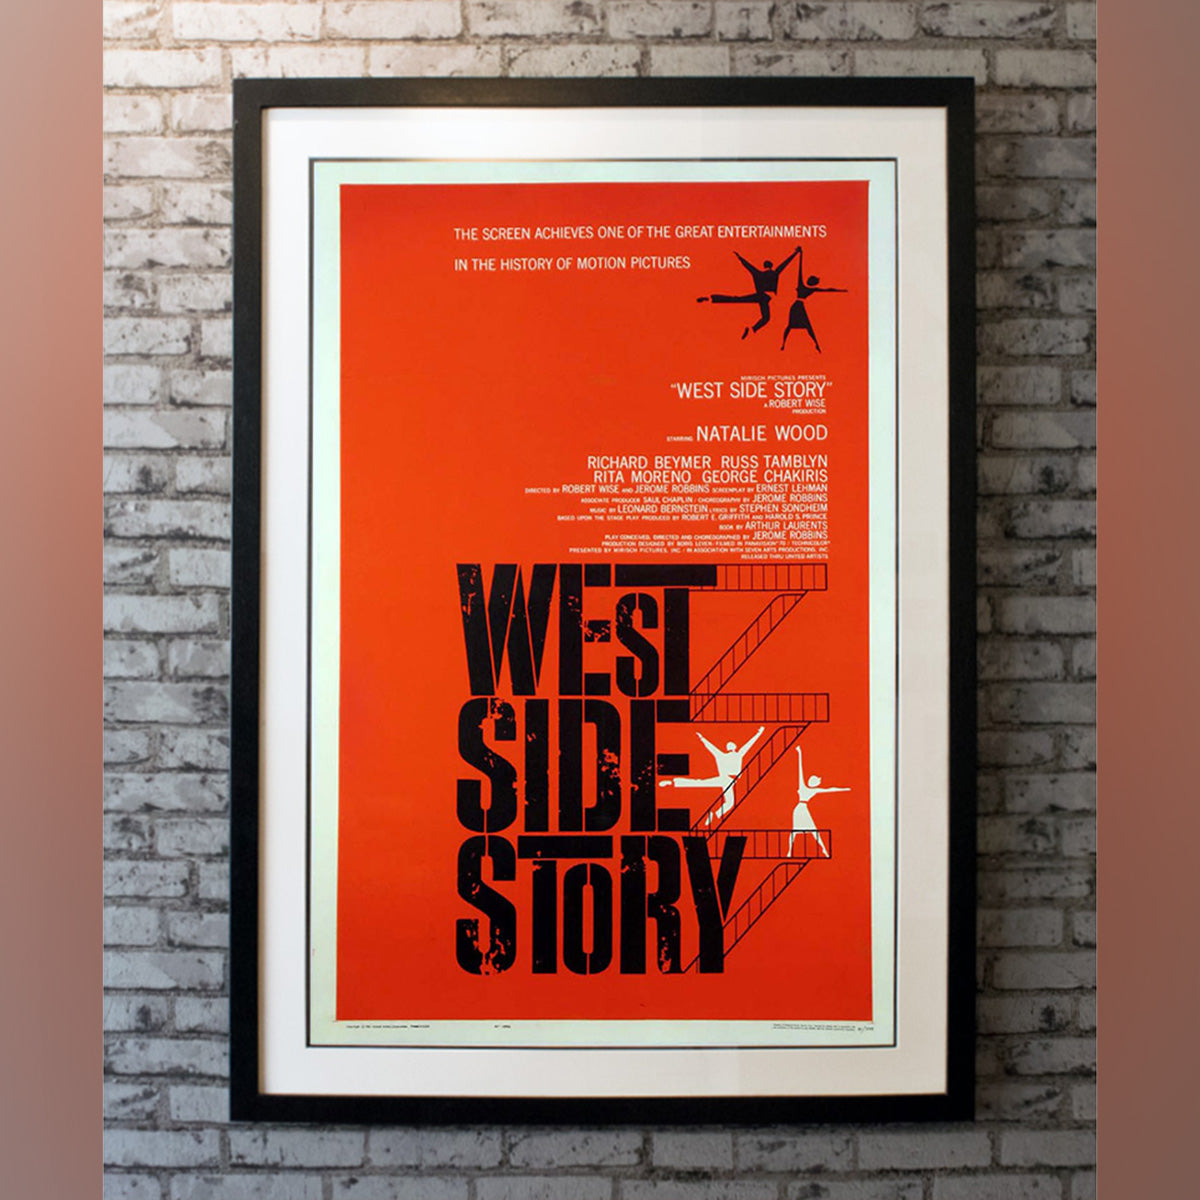 Original Movie Poster of West Side Story (1961)